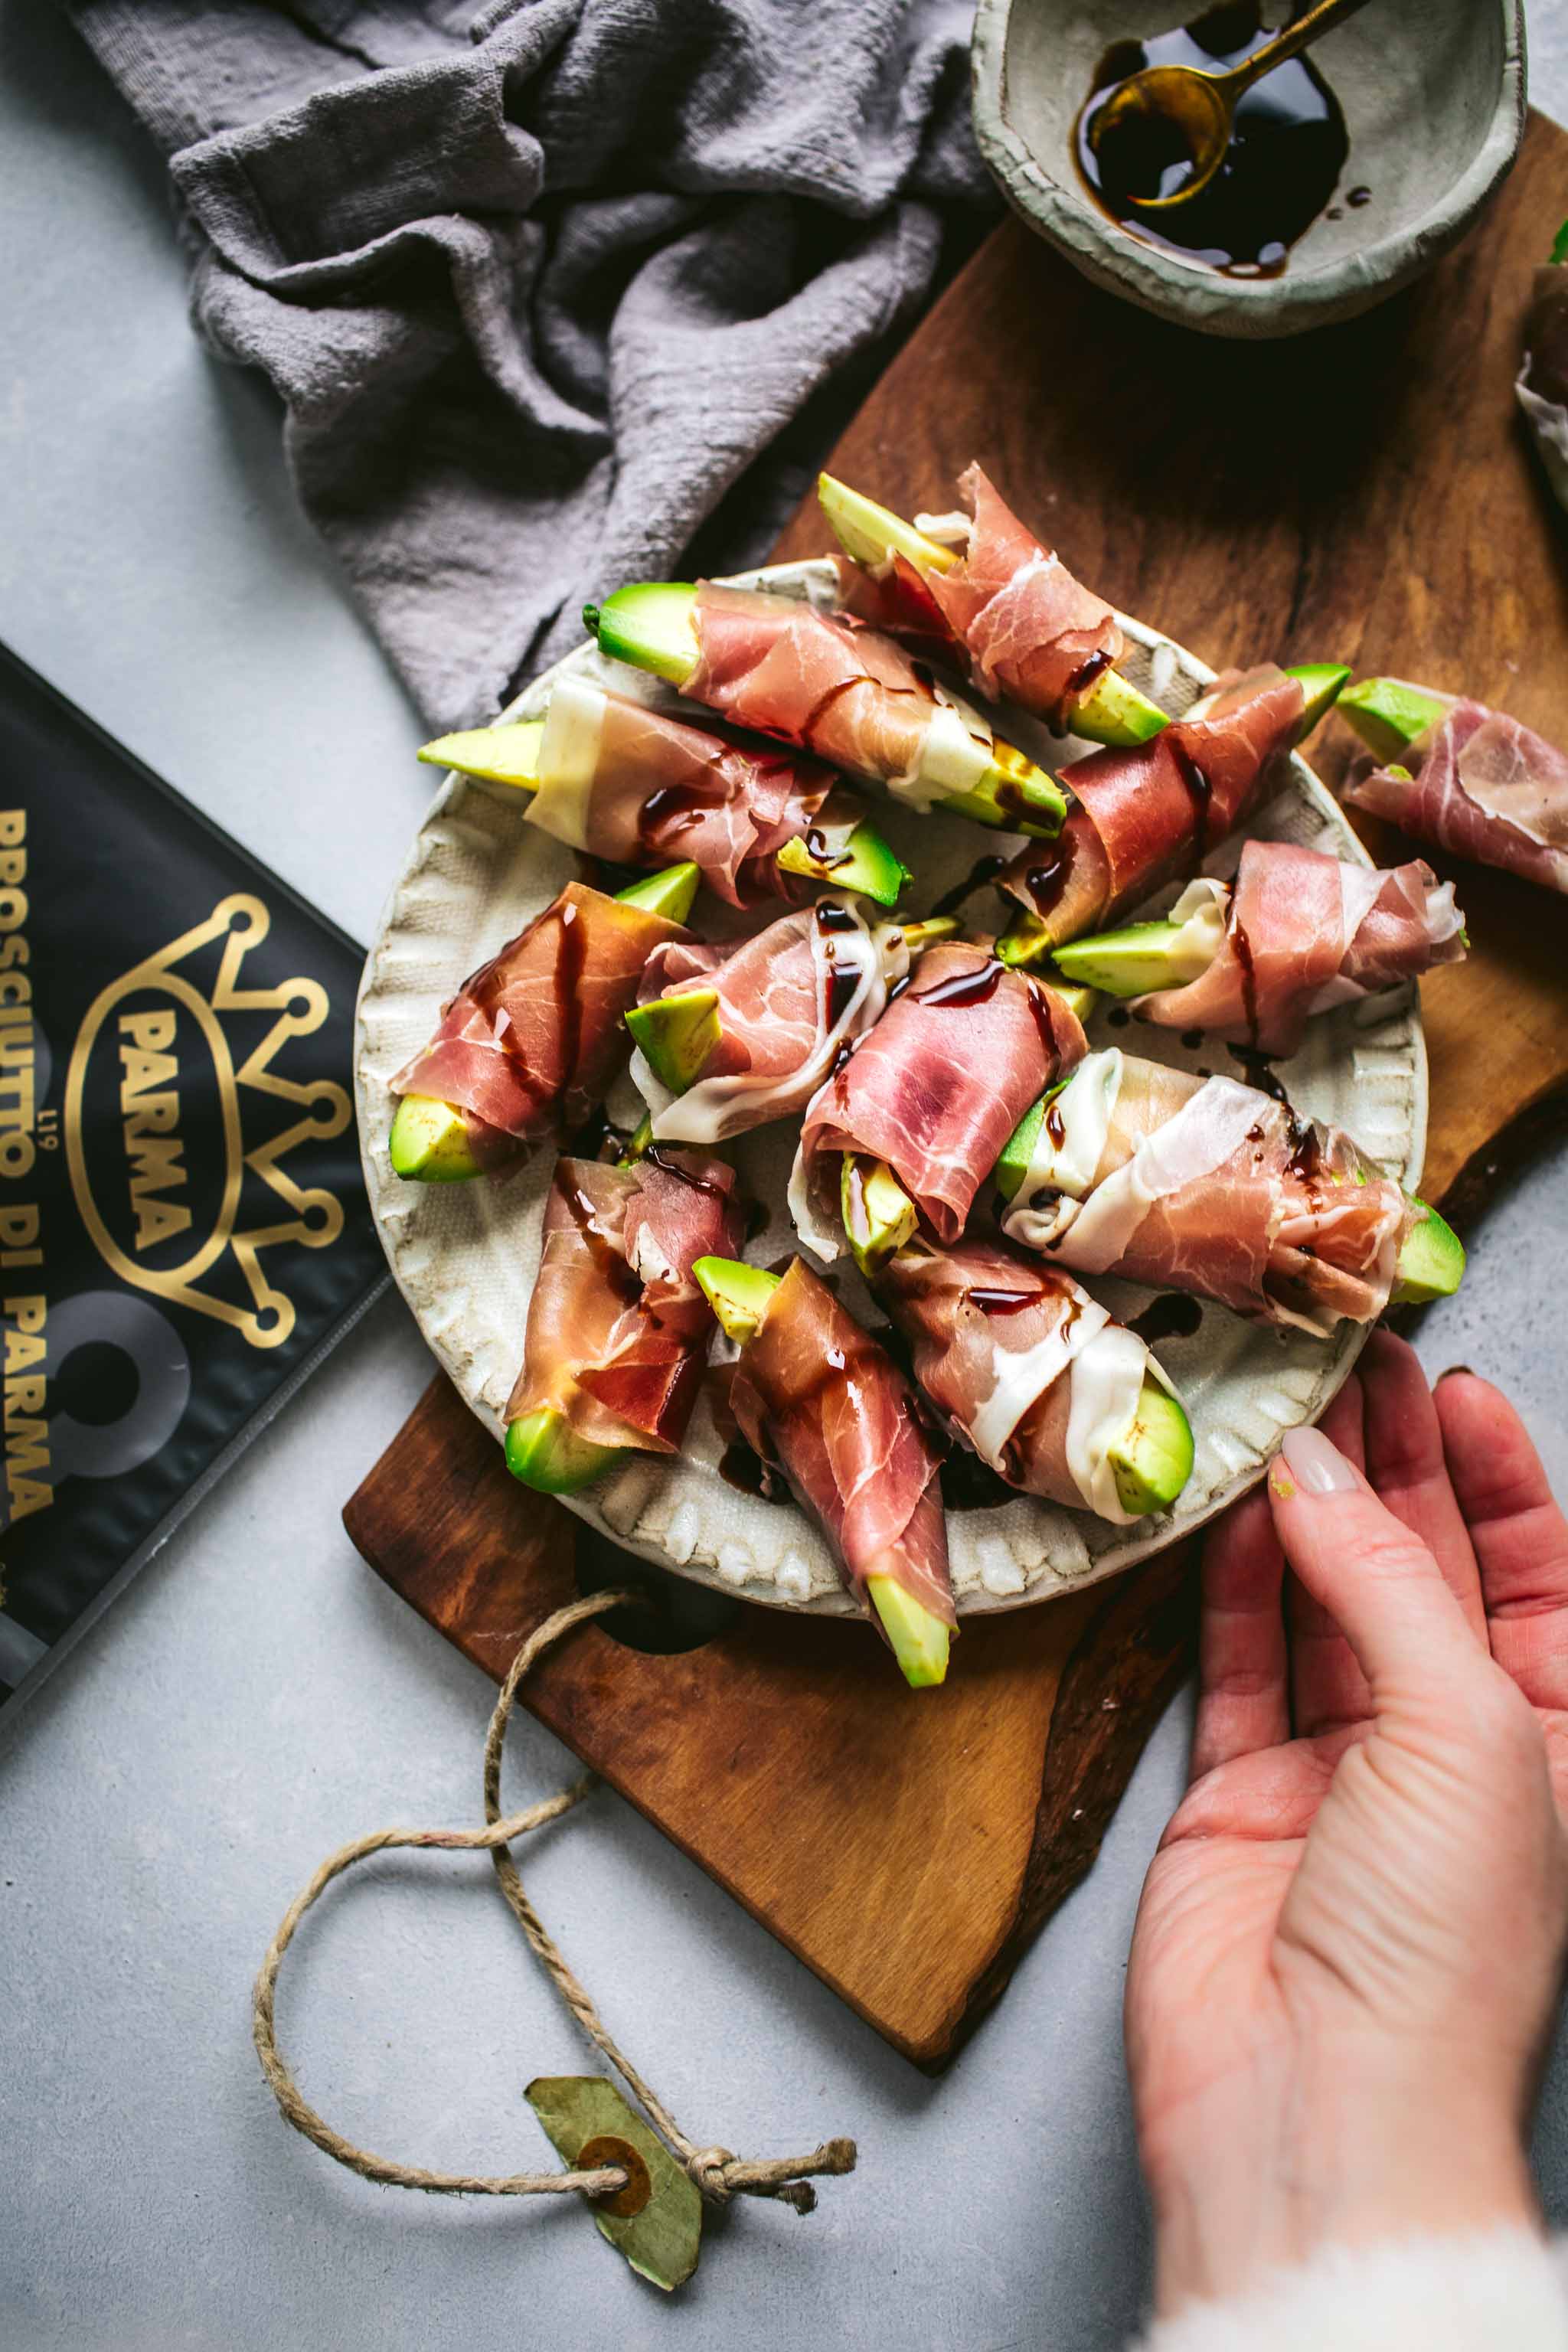 Hand holding plate of Avocado bites wrapped in prosciutto on wood cutting board.